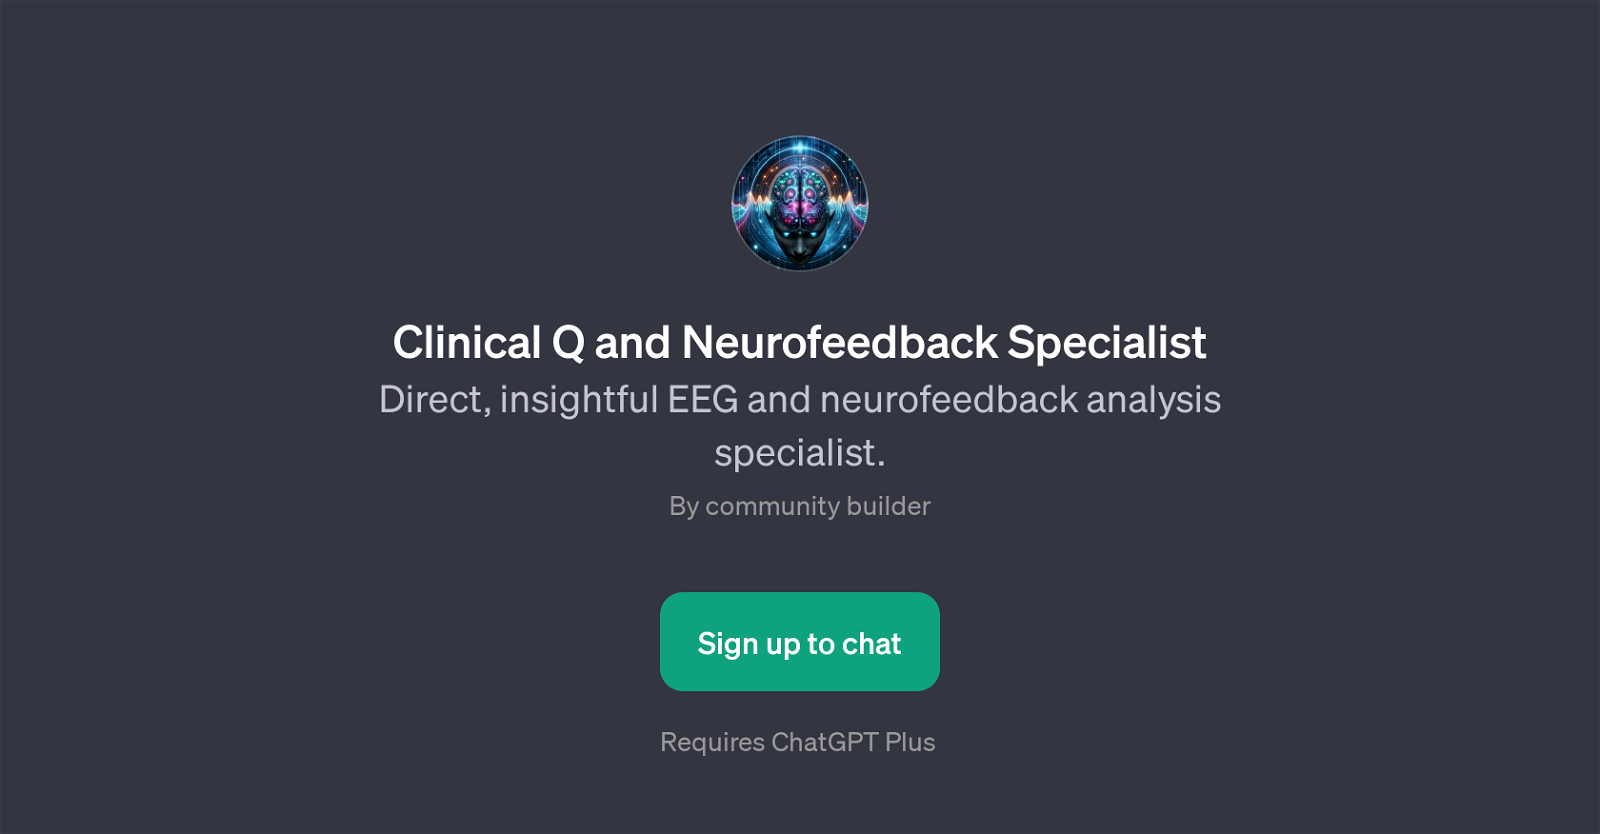 Clinical Q and Neurofeedback Specialist website